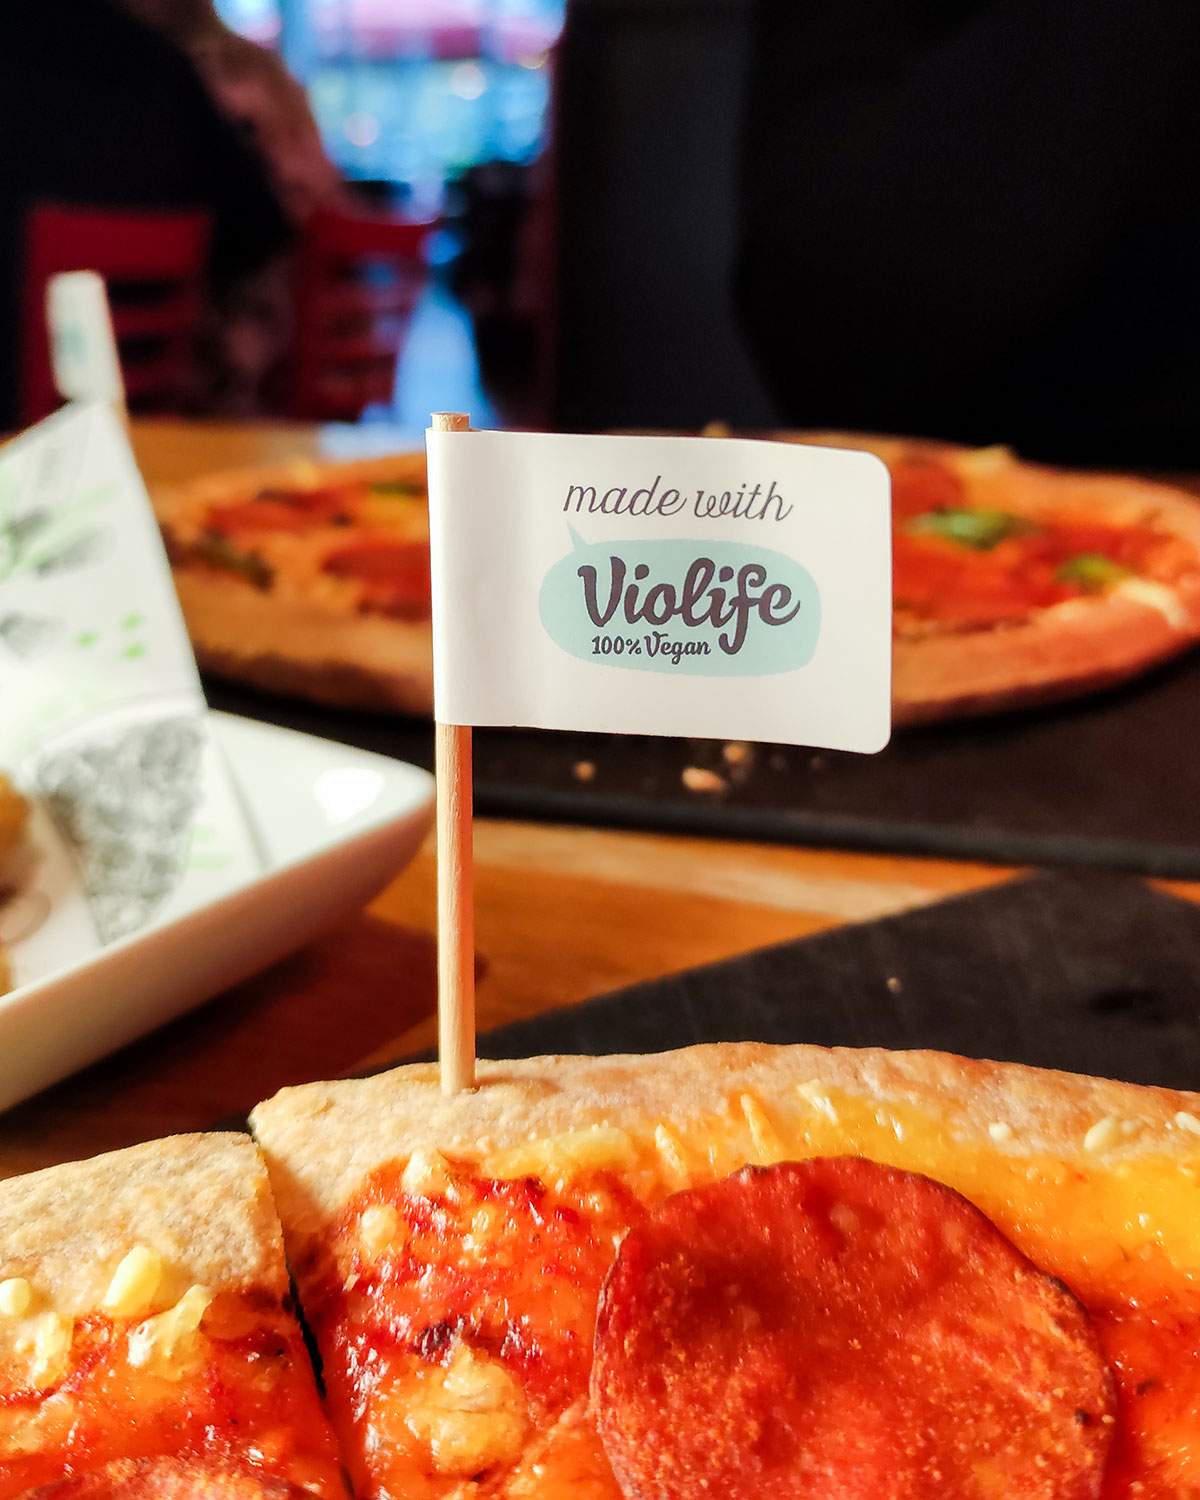 violife flag in the pizza crust of a vegan pizza at pizza hut